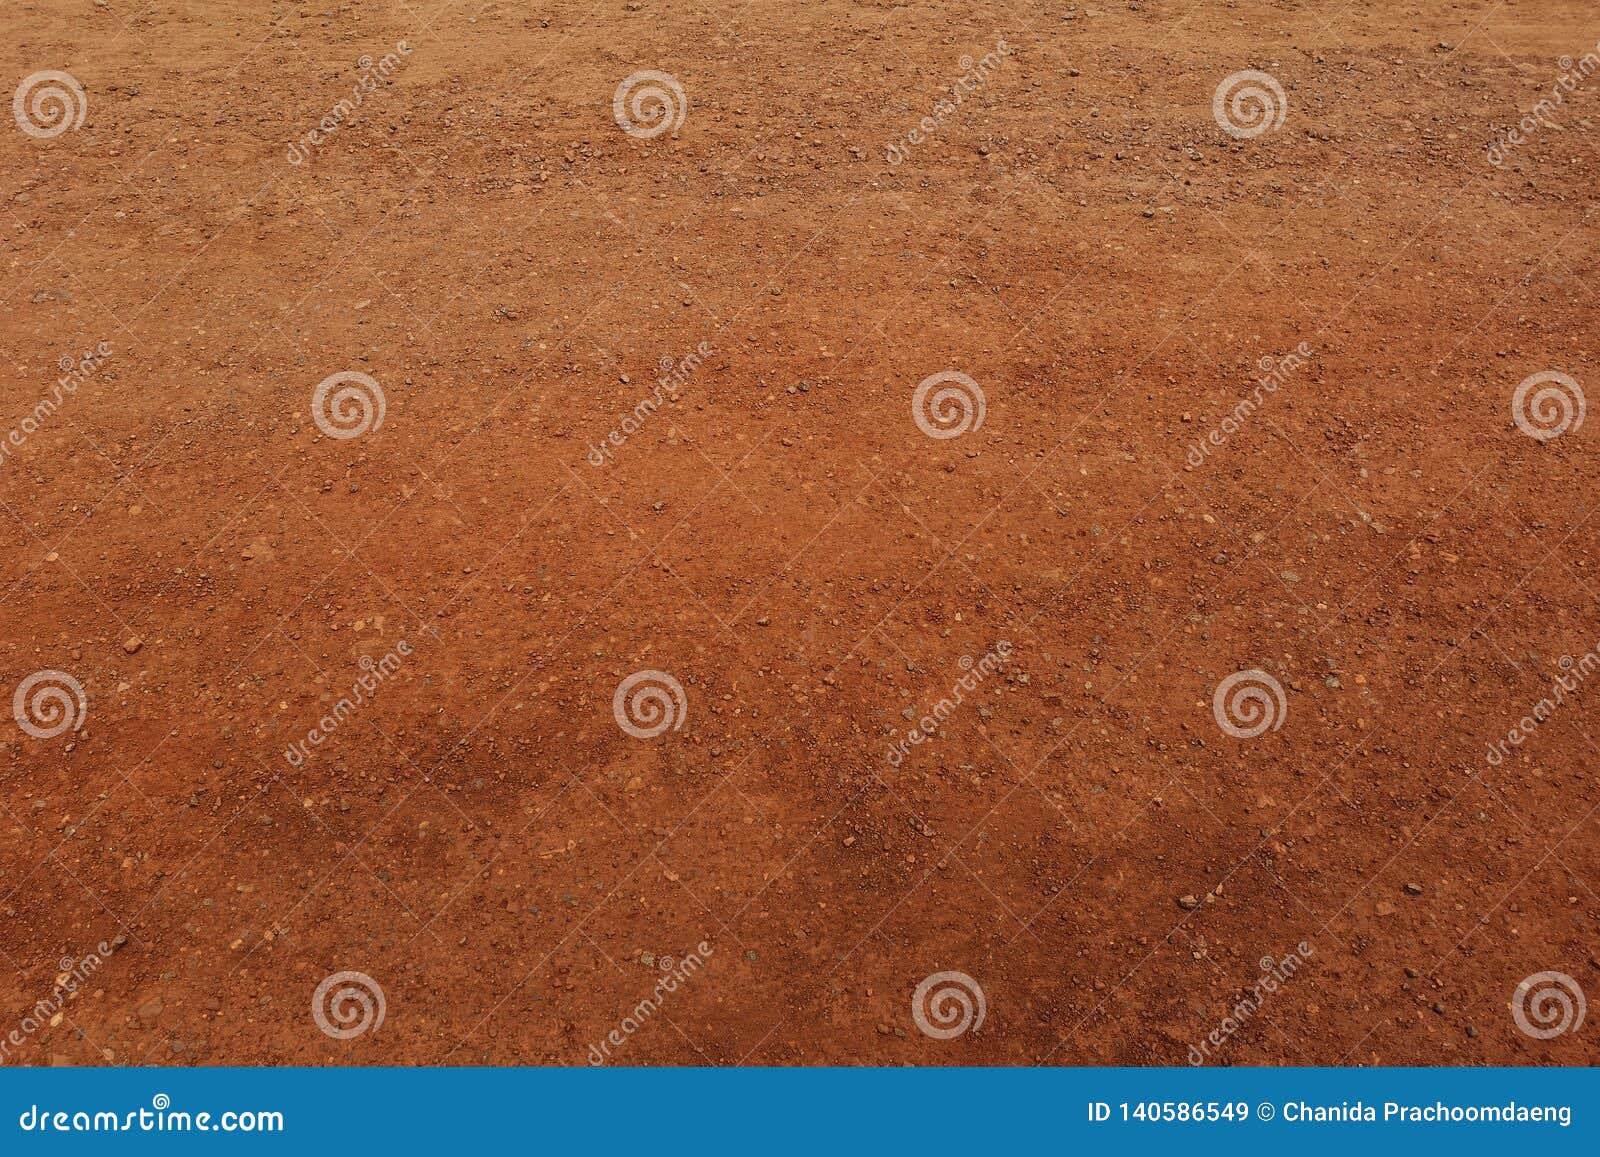 laterite soil textured background and is mostly of the iron oxide and aluminum